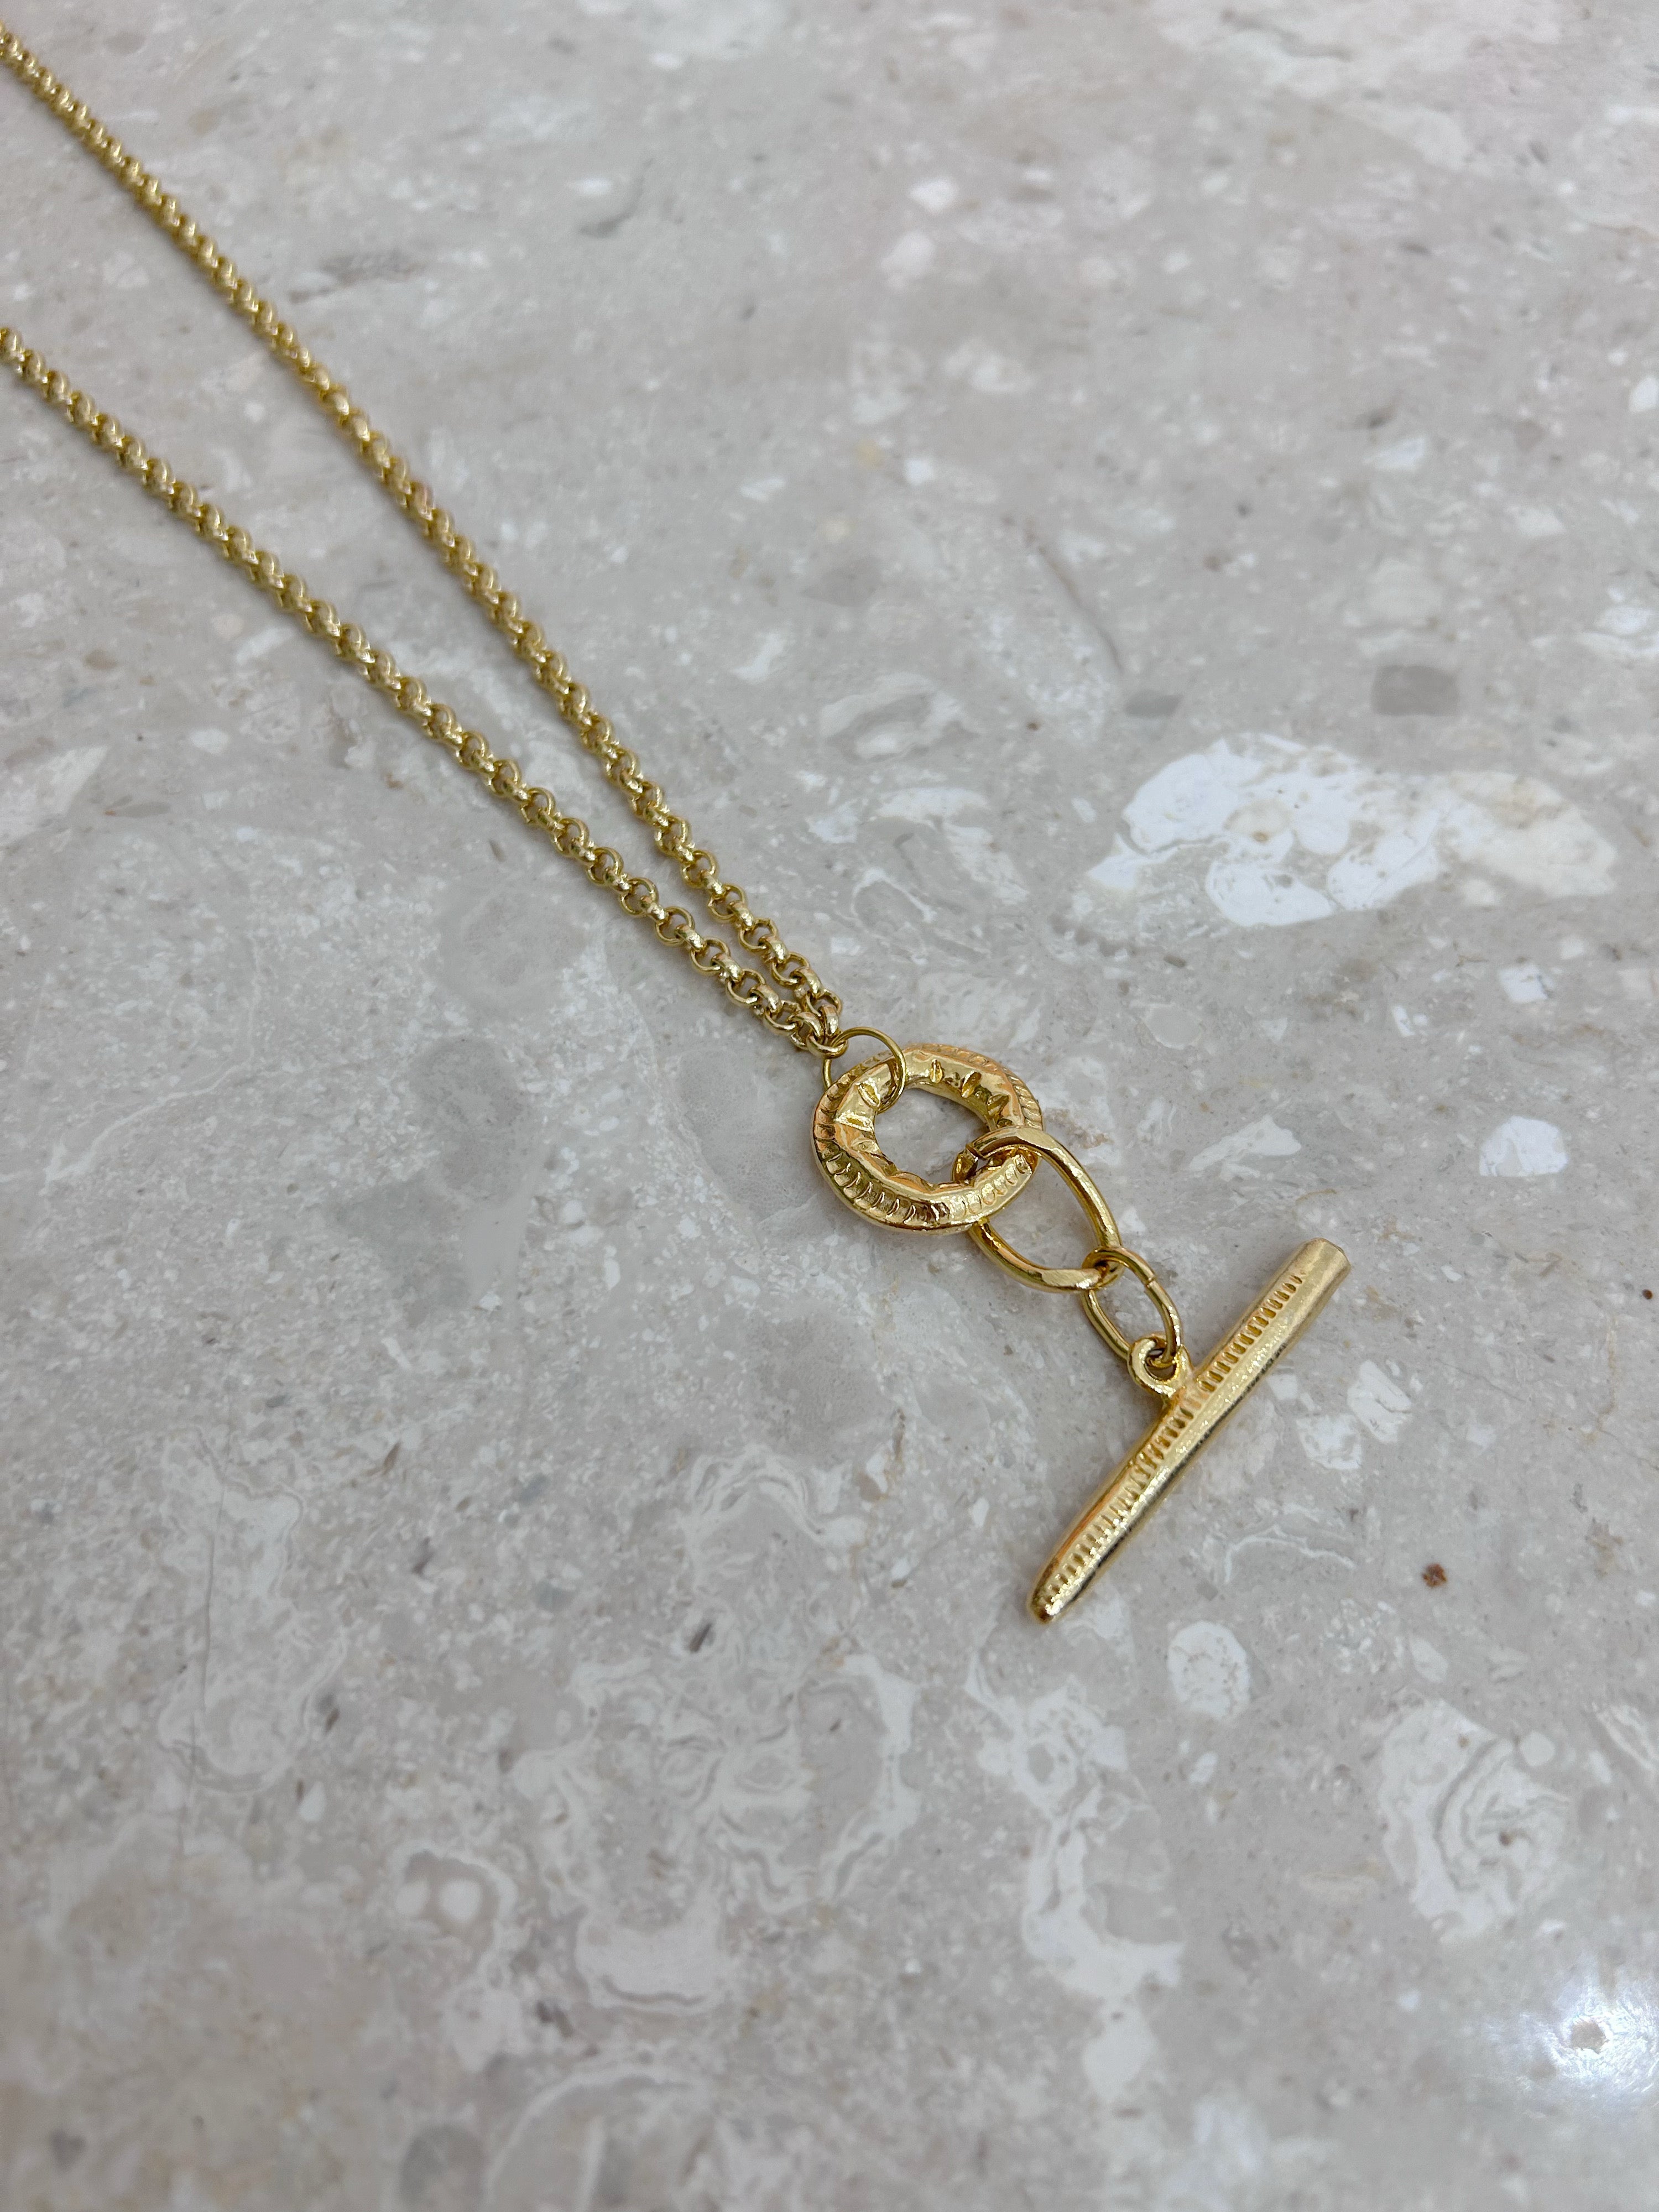 Gold plated T-Bar necklace - 18"